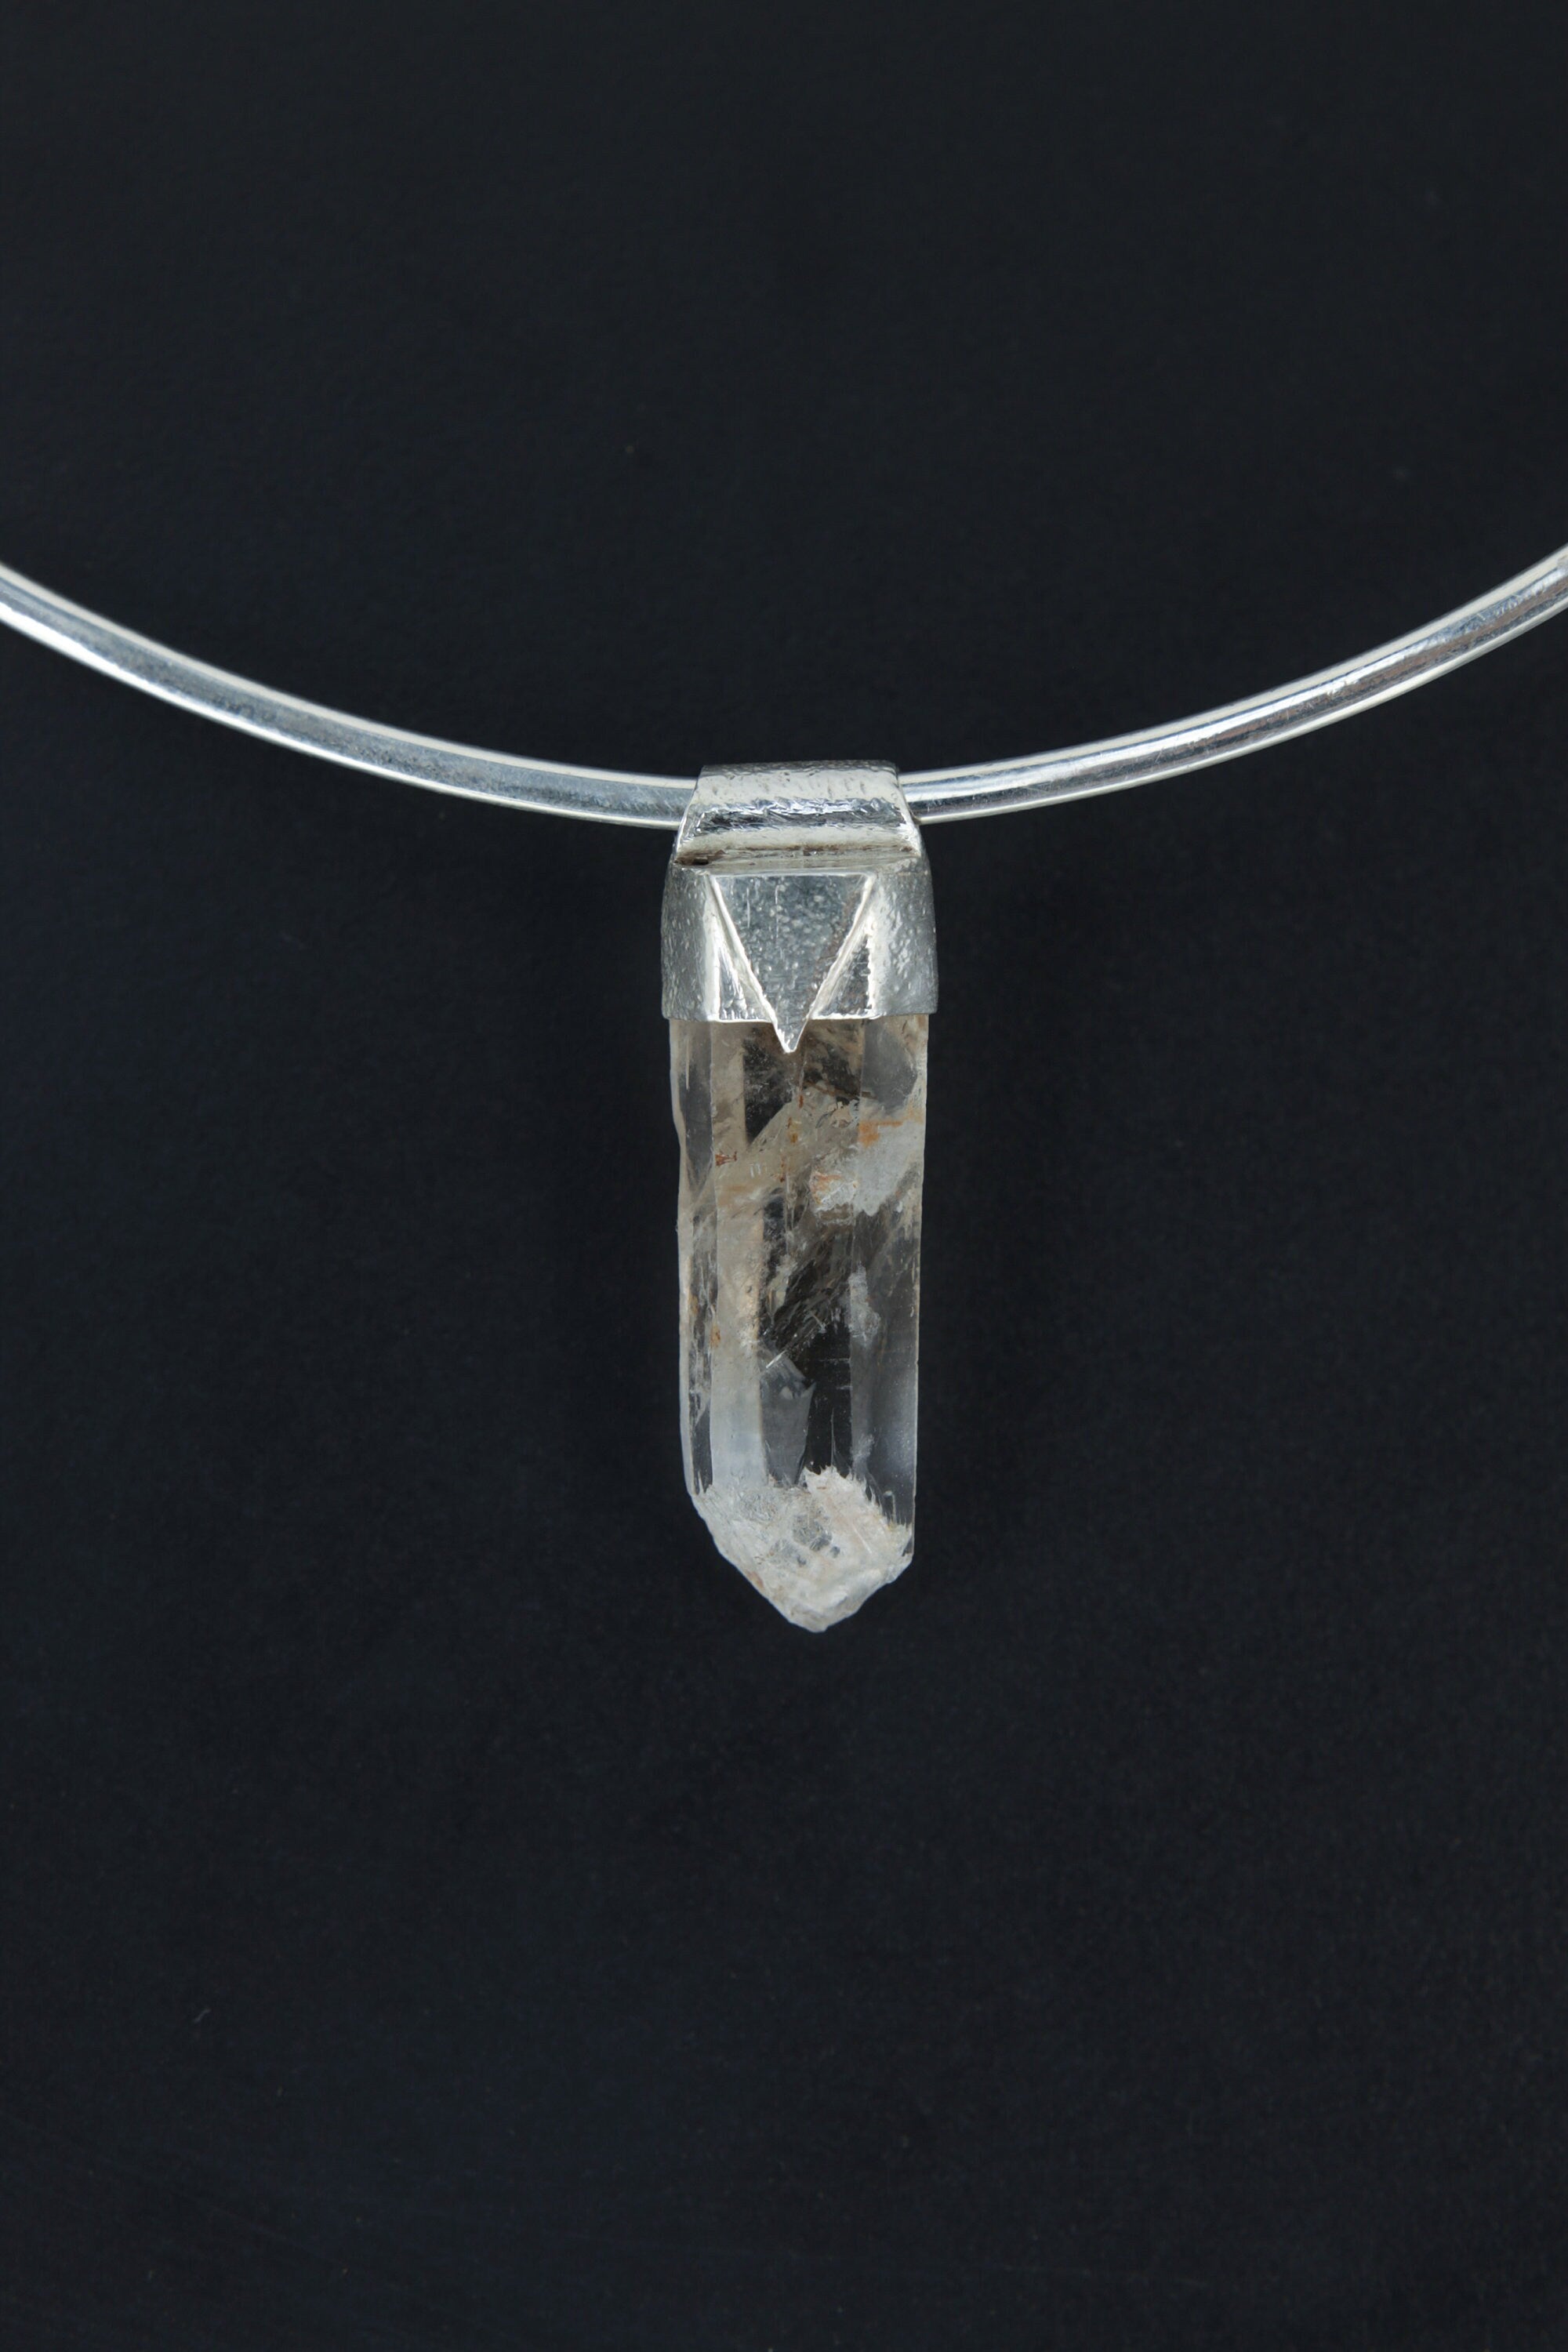 Lemurian Self Healed Phantom Pyrite Inclusion Quartz Point - Stack Pendant - Organic Textured 925 Sterling Silver - Crystal Necklace